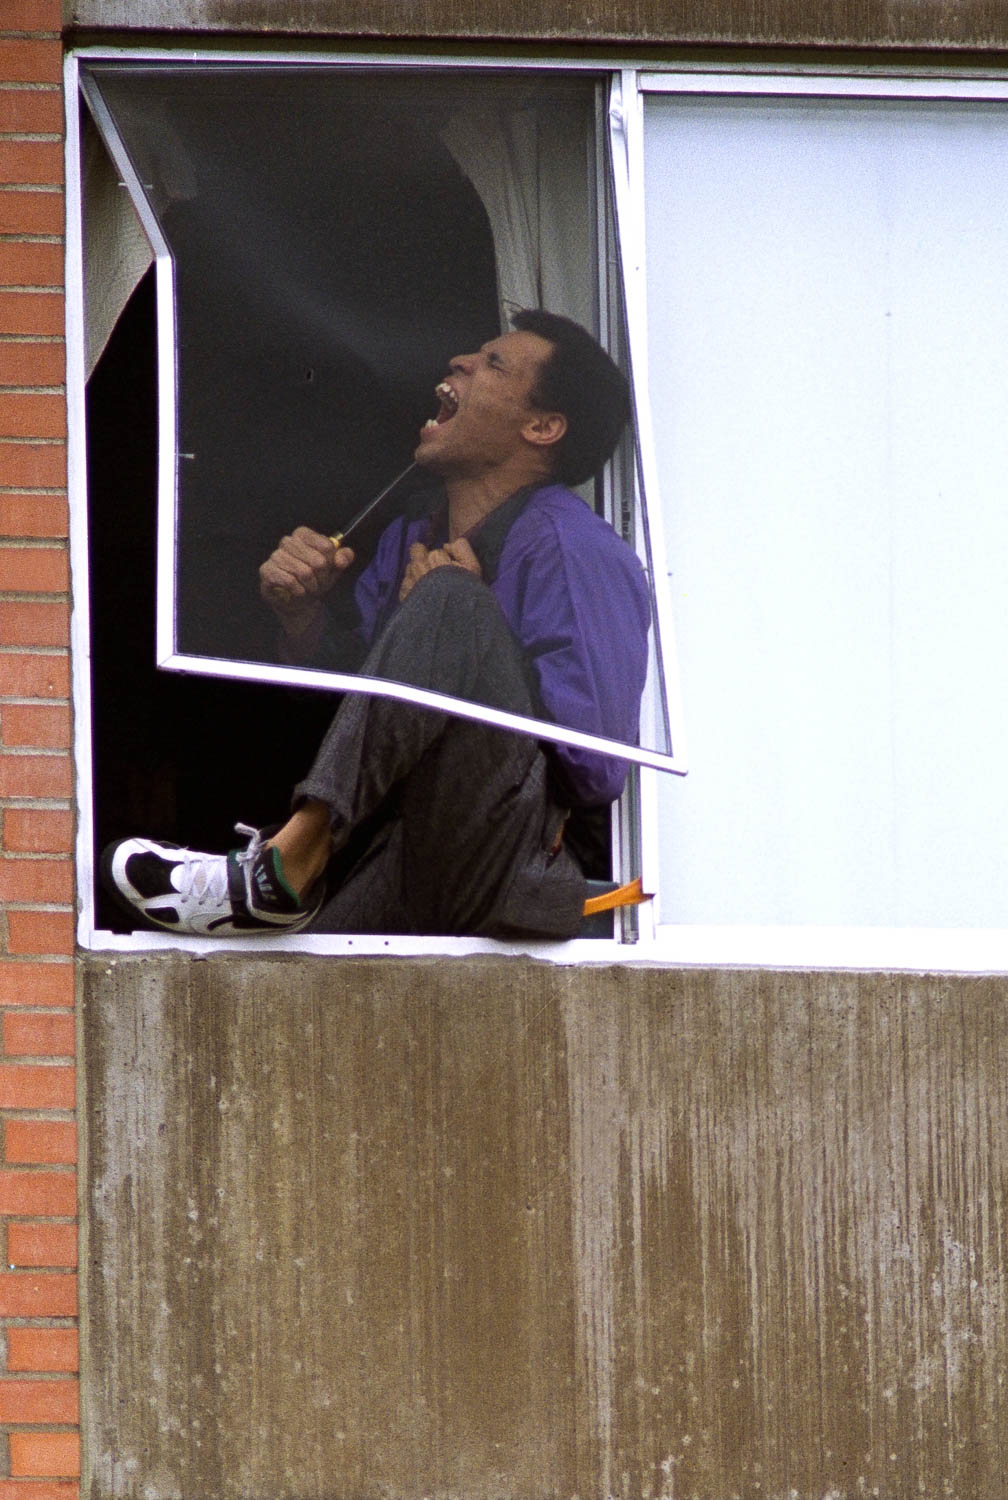 An unidentified man threatens to commit suicide in the window of his Moline apartment. Police were able to talk him out of the third story window without incident after an hour long stand-off. Police officials refuse to release the subject's name. (Todd Mizener - Dispatch/Argus)